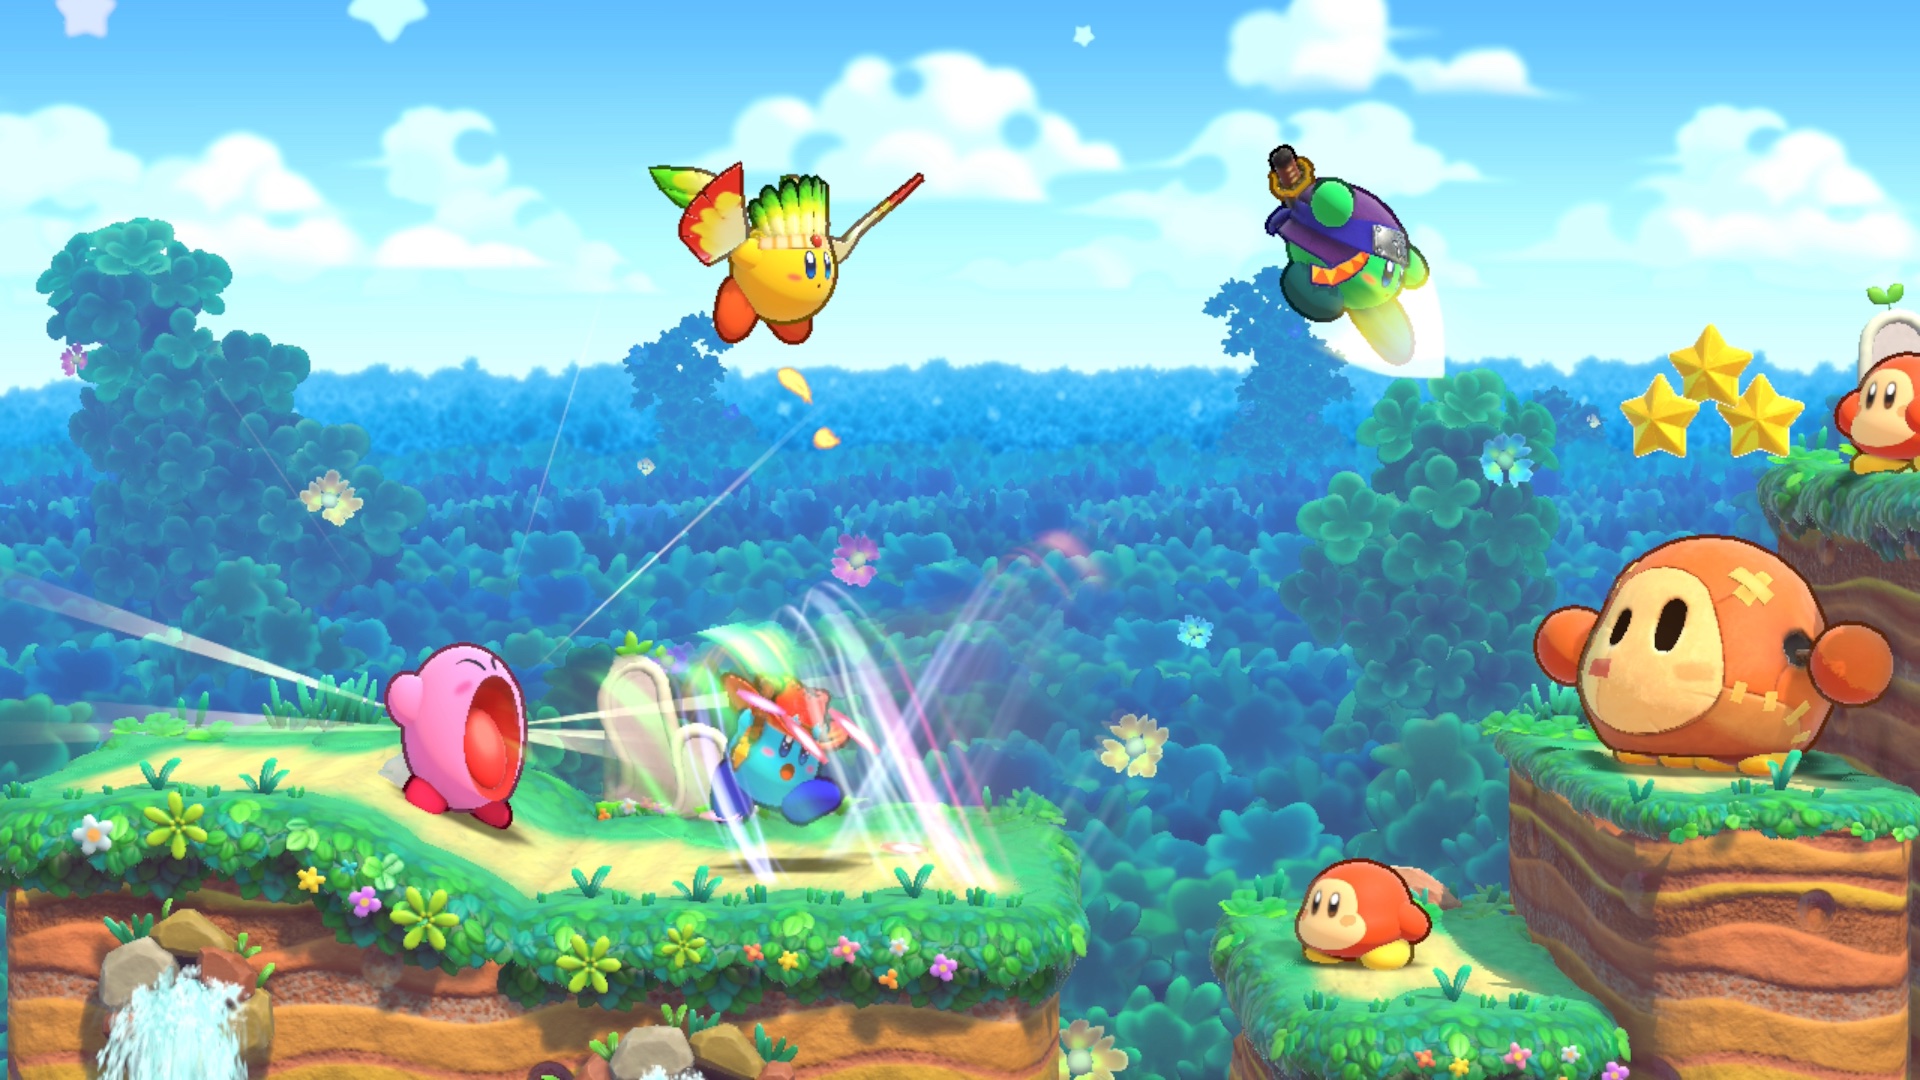 Four Kirbys face a trio of Waddle Dee using a variety of copy abilities in a screenshot from Kirby’s Return to Dream Land Deluxe